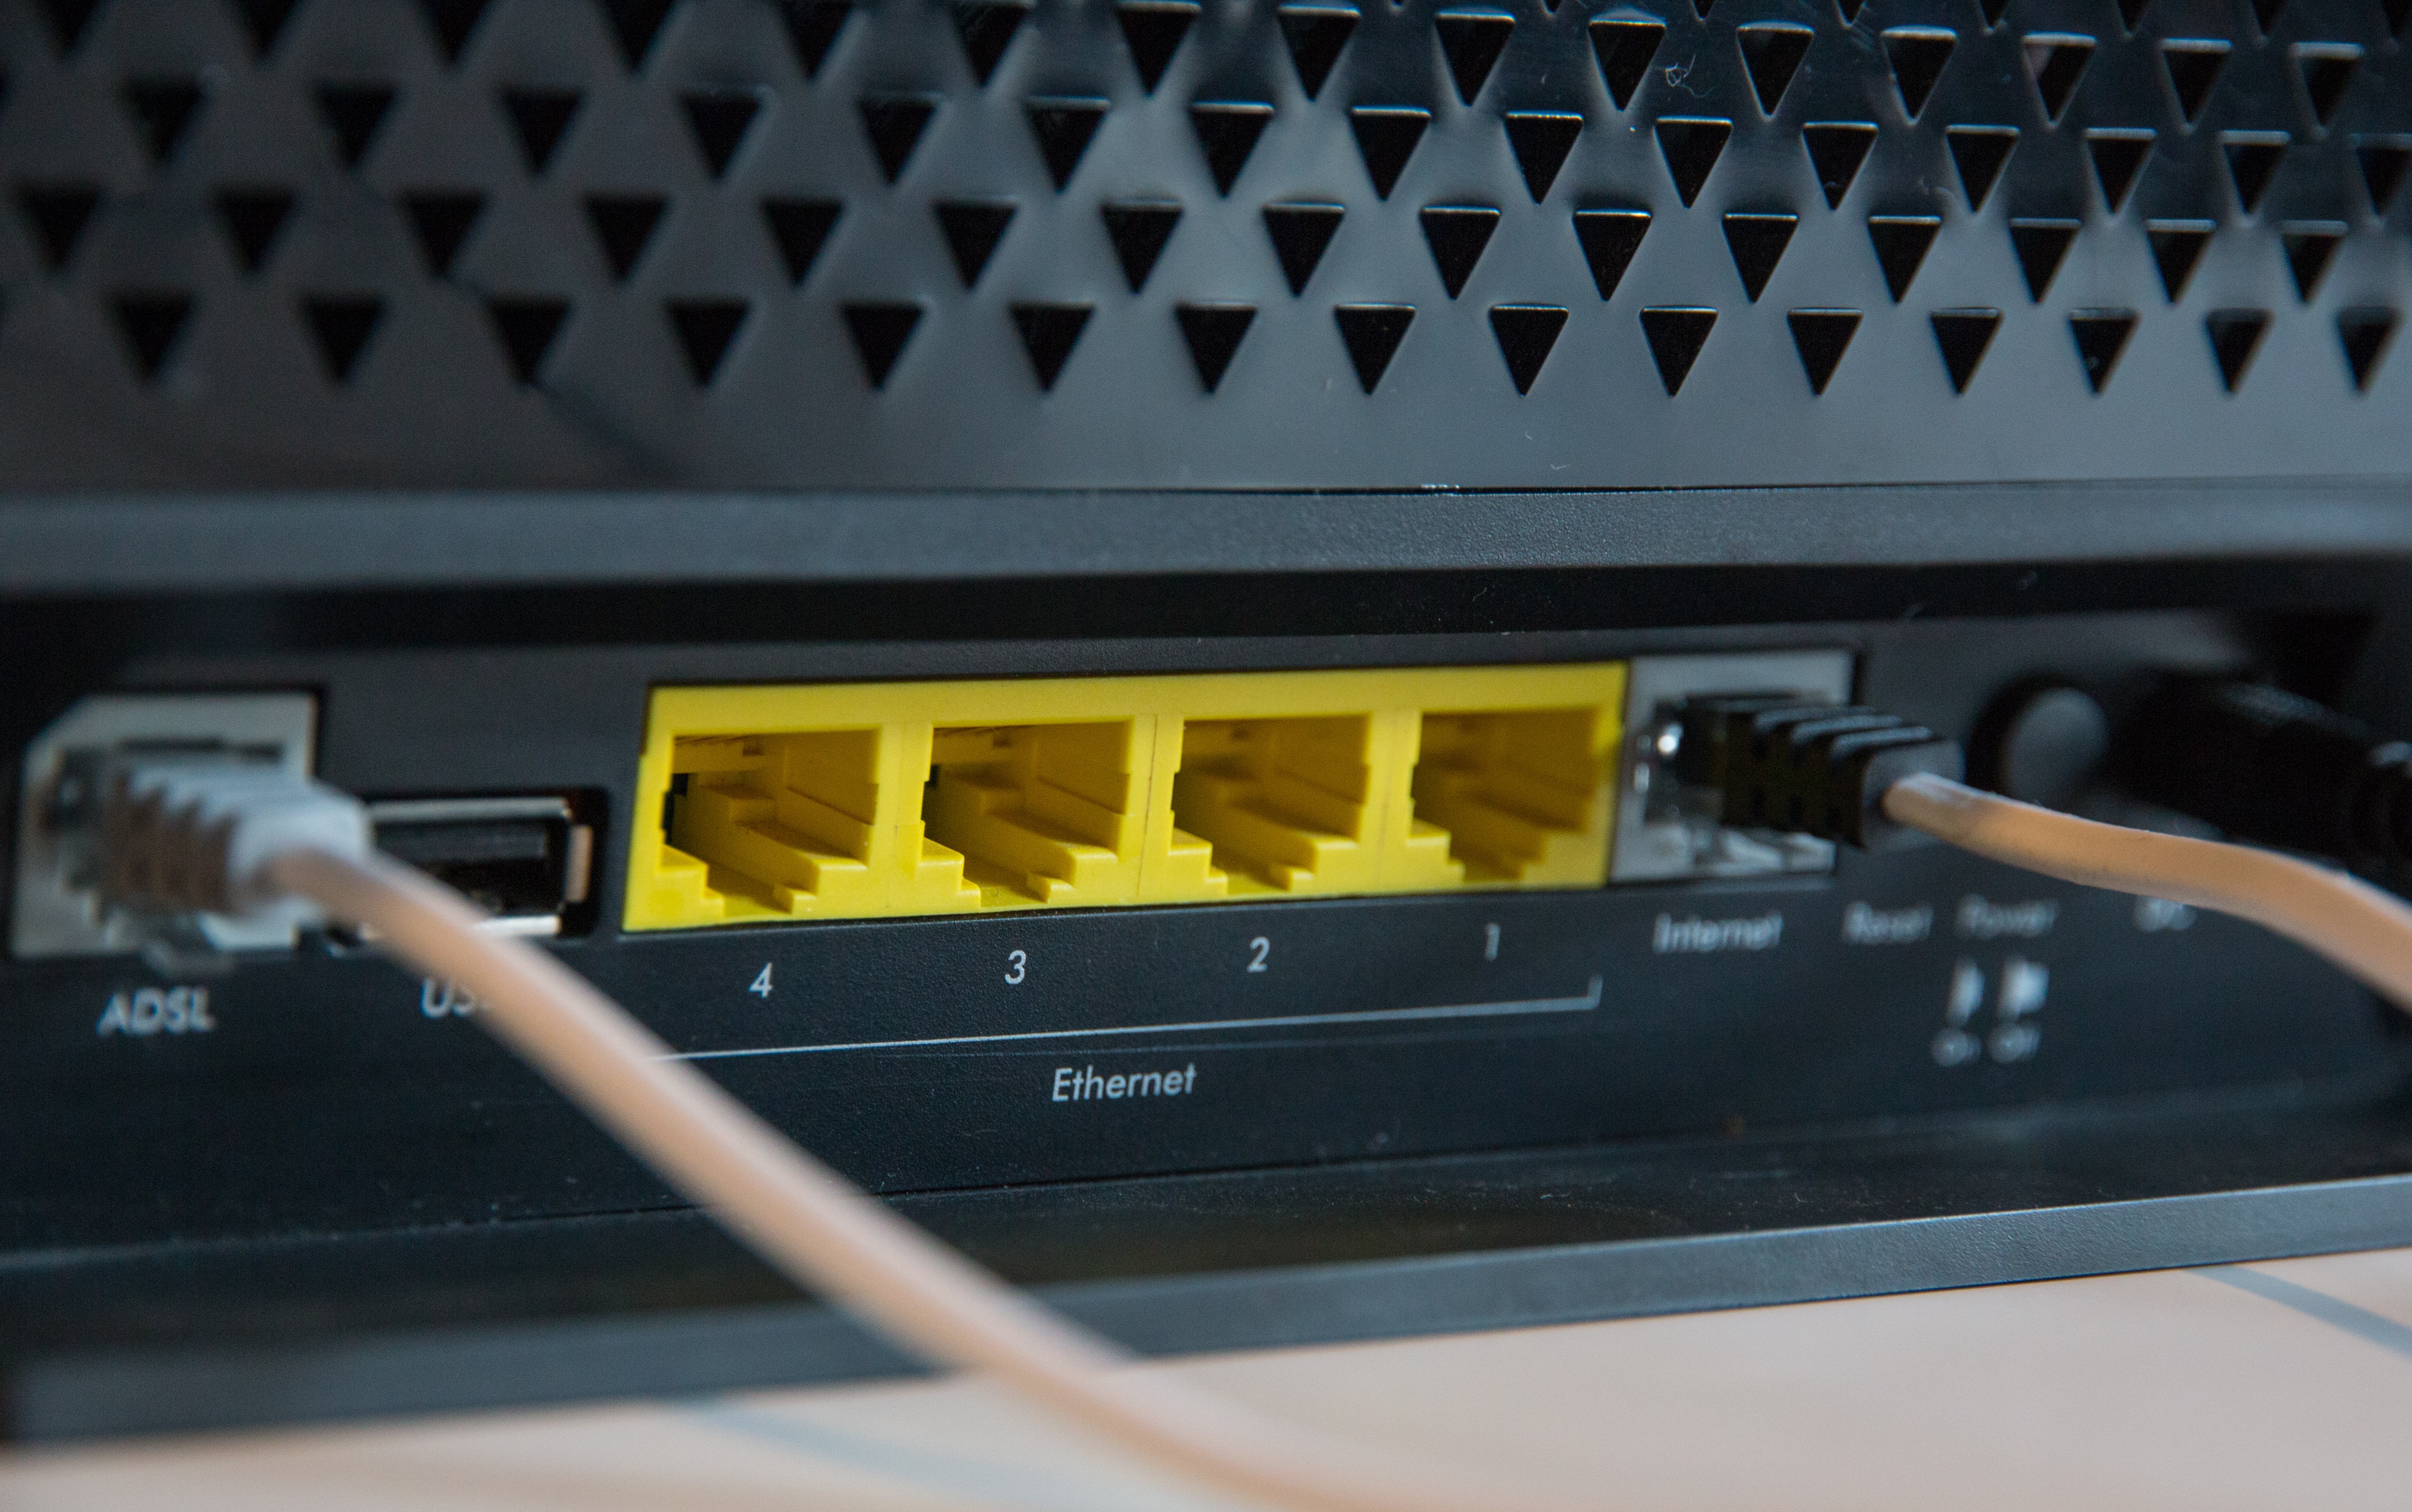 How Much Power Does A Network Router Use?